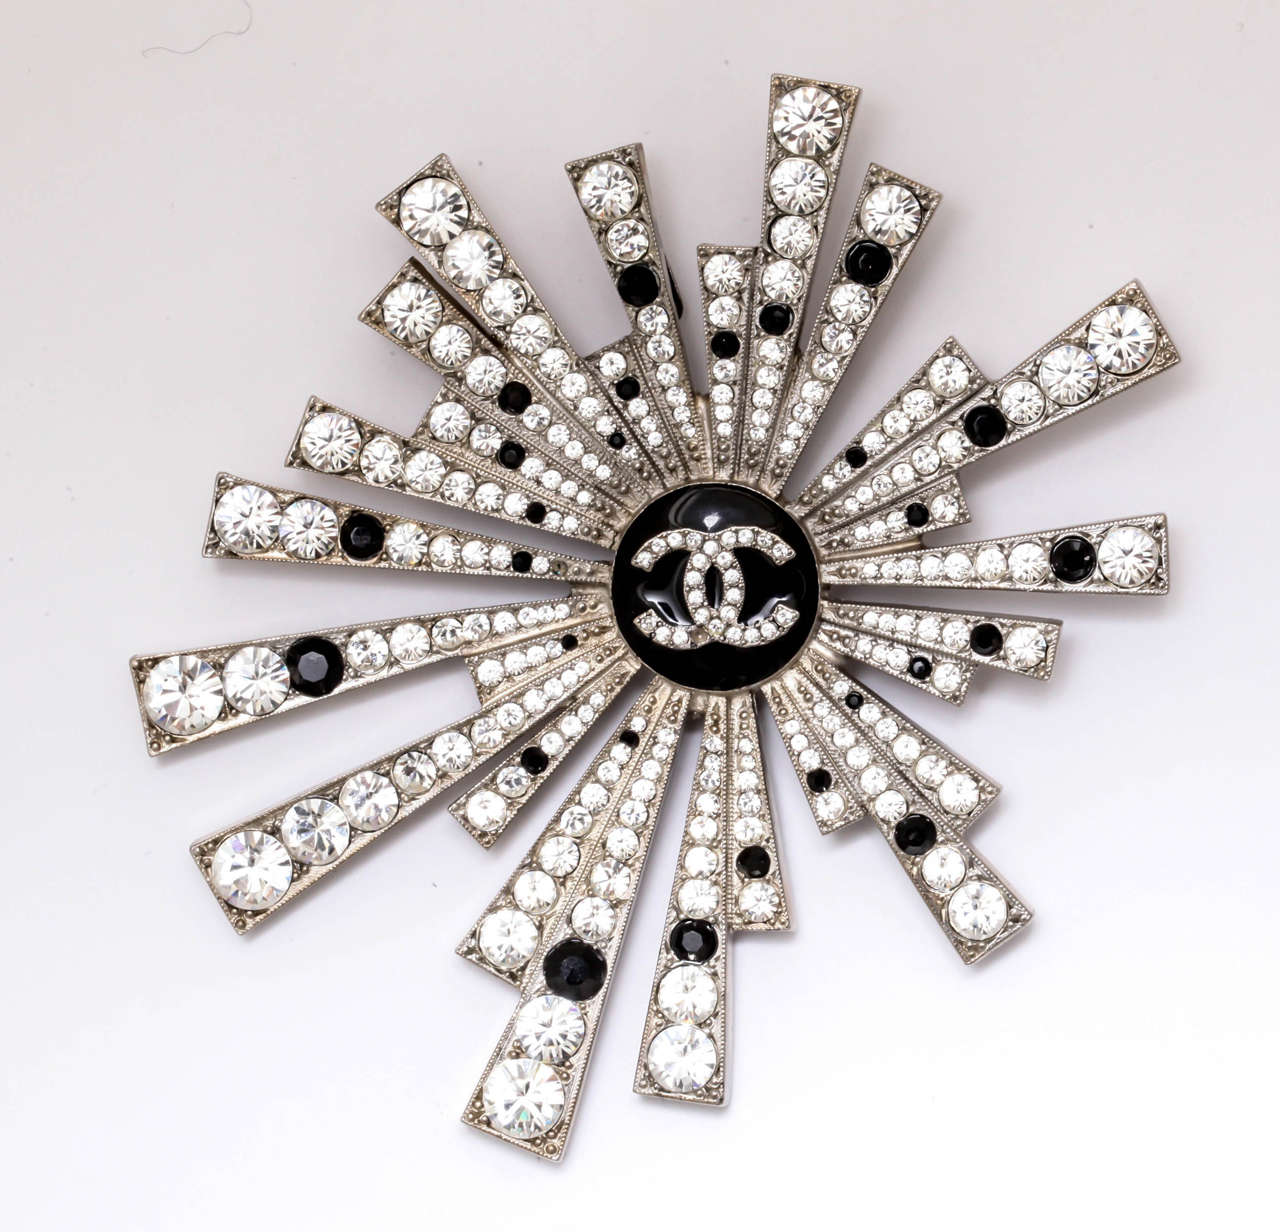 A rare Chanel brooch that can be worn as a pendant with paste stones surrounding an enamel logo. Marked on the back with the Chanel logo from Autumn 05.